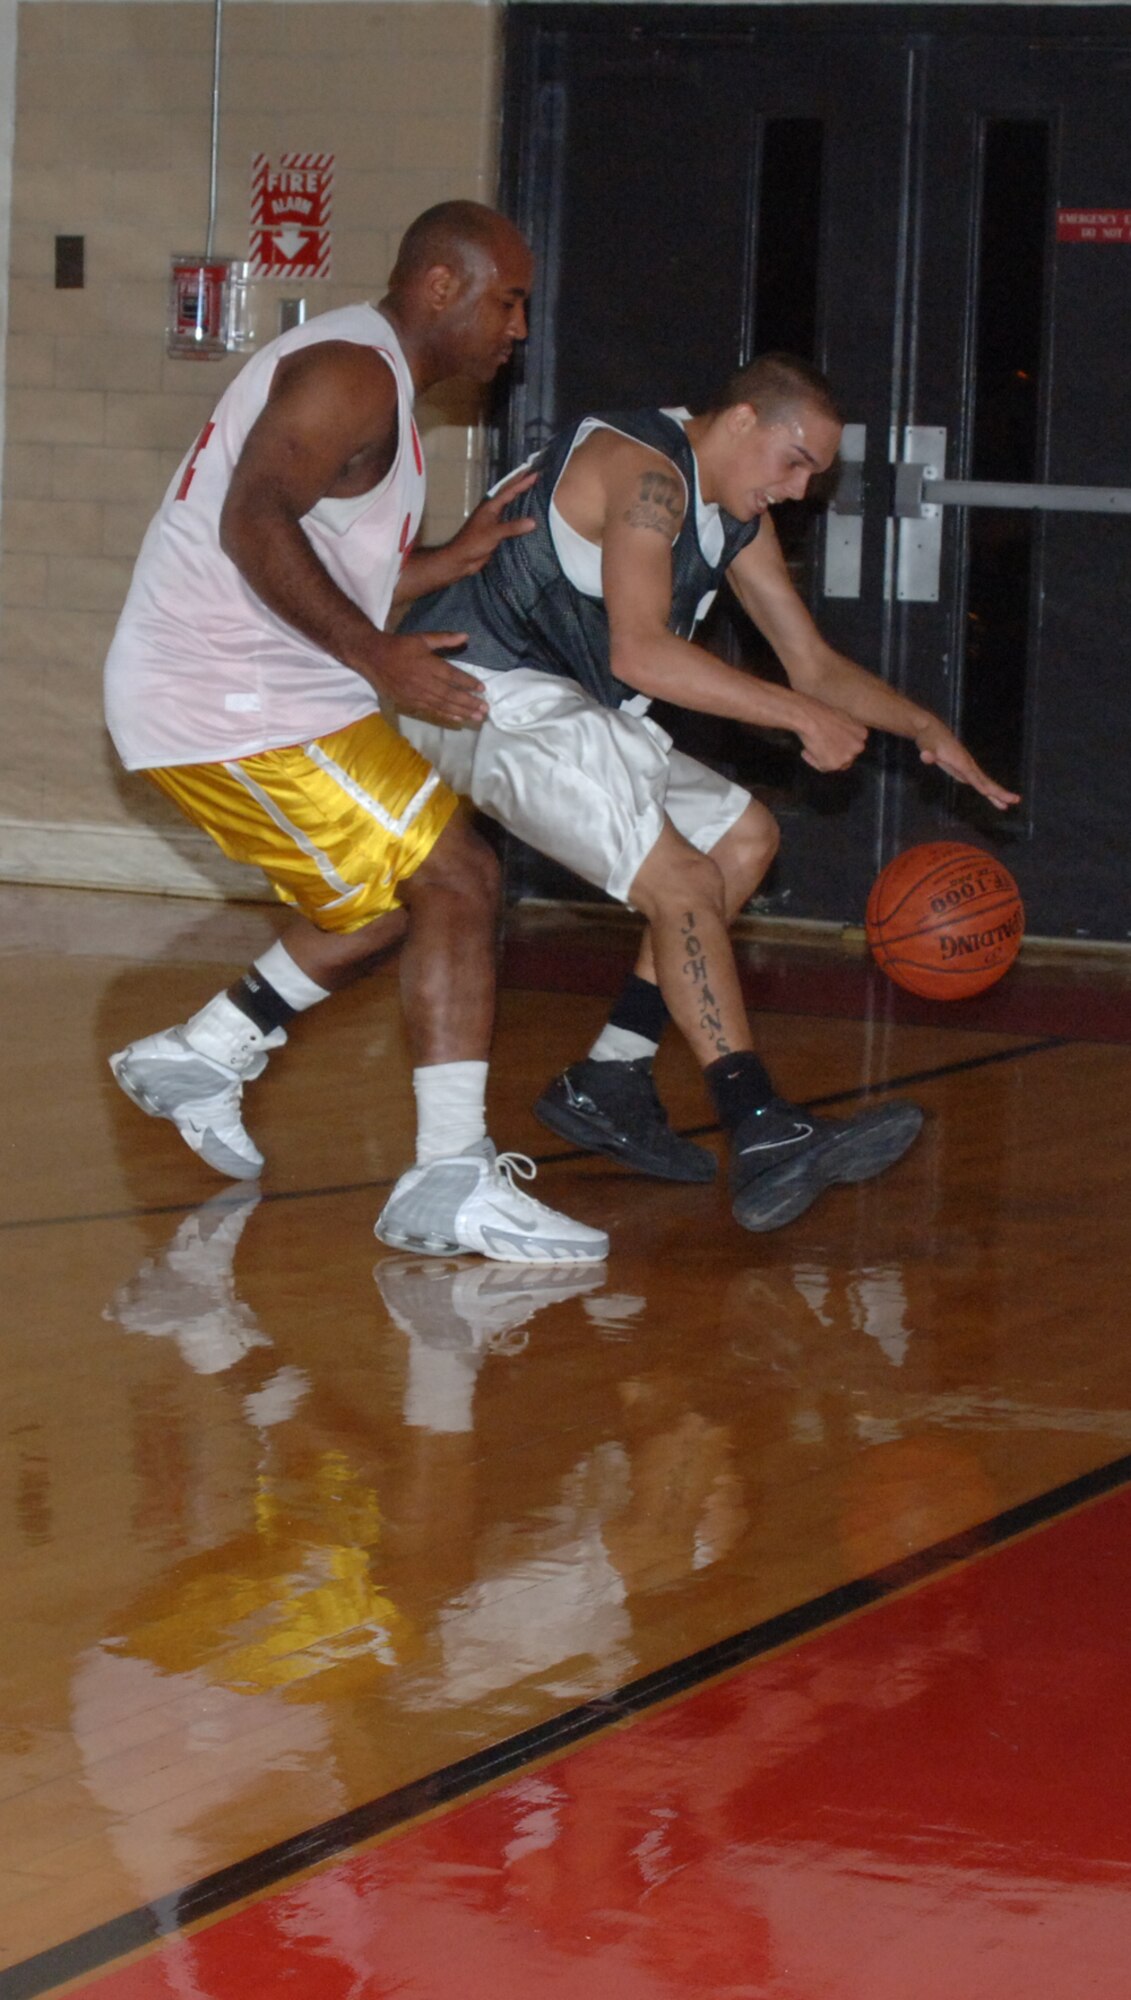 Airman Bryant Johanson, 14th Medical Group, and 1st Lt. Derrick Hodges, 14th Operations Support Suqadron, race for a loose ball in intramural basketball action Wednesday night at the Fitness Center. The 14th MDG was victorious over the 14th OSS by a score of 67 to 40. (U.S. Air Force photo by Airman 1st Class Danielle Hill)
